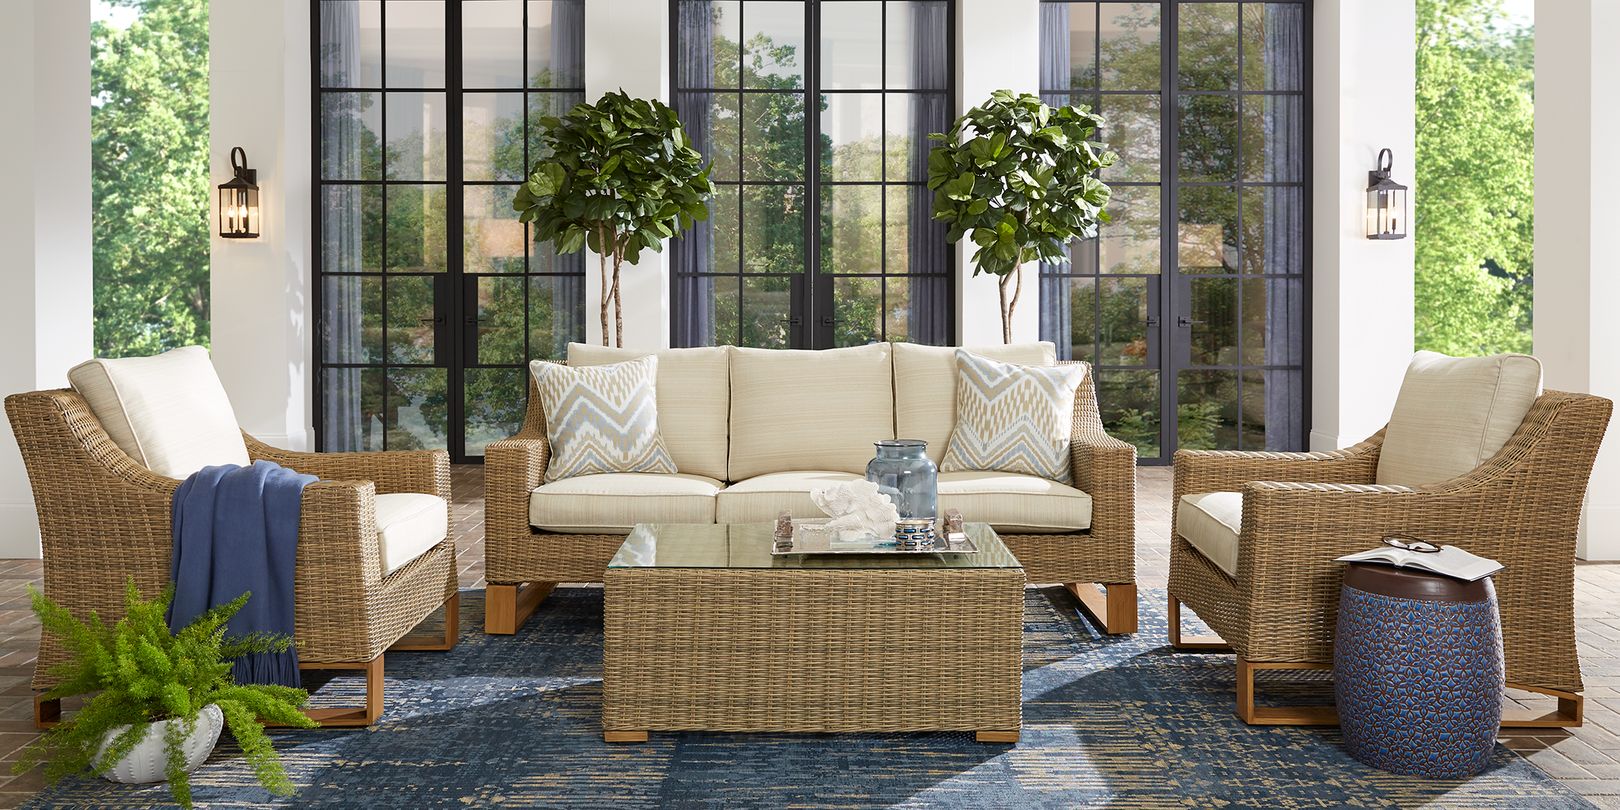 Image of a wicker patio furniture seating set